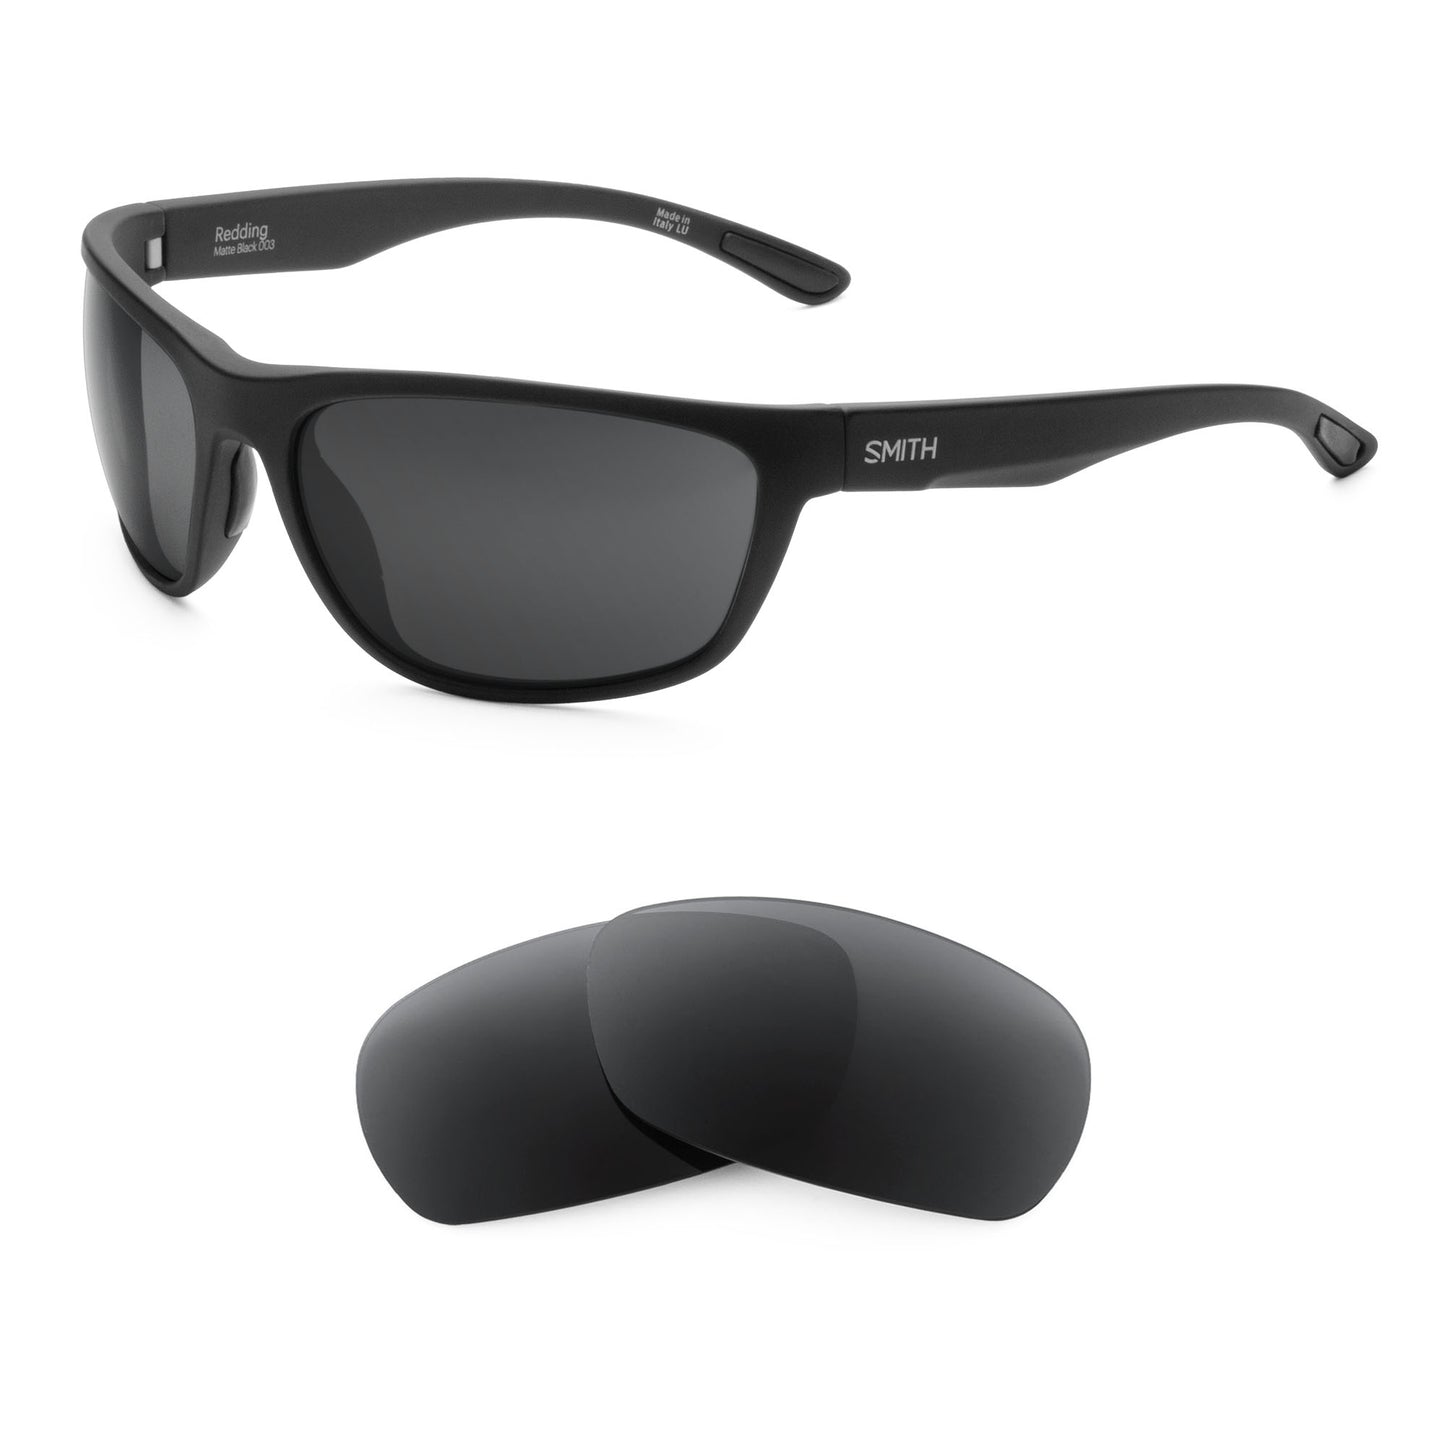 Smith Redding sunglasses with replacement lenses